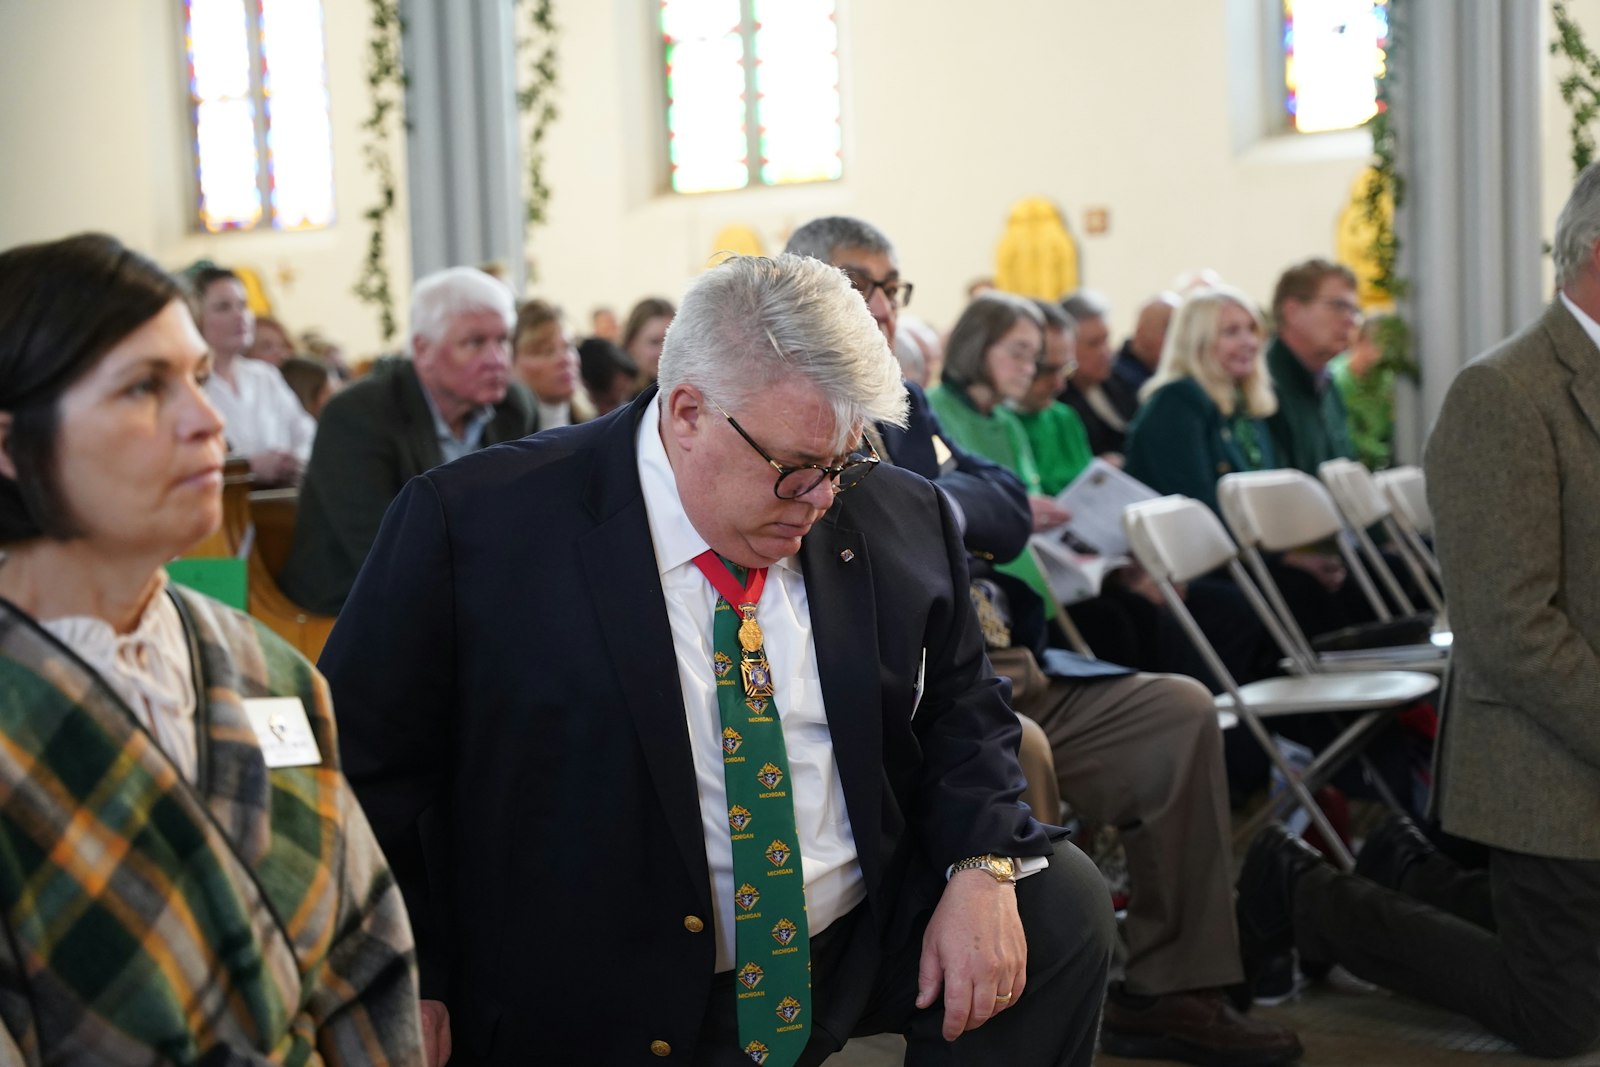 Christopher Kolomjec, state deputy of the Michigan Knights of Columbus, kneels before the Blessed Sacrament at Most Holy Trinity Parish during the St. Patrick's Day Mass. The Mass involves many fraternal organizations around the state, including the Knights of Columbus, the Ancient Order of Hibernians and the United Irish Societies.